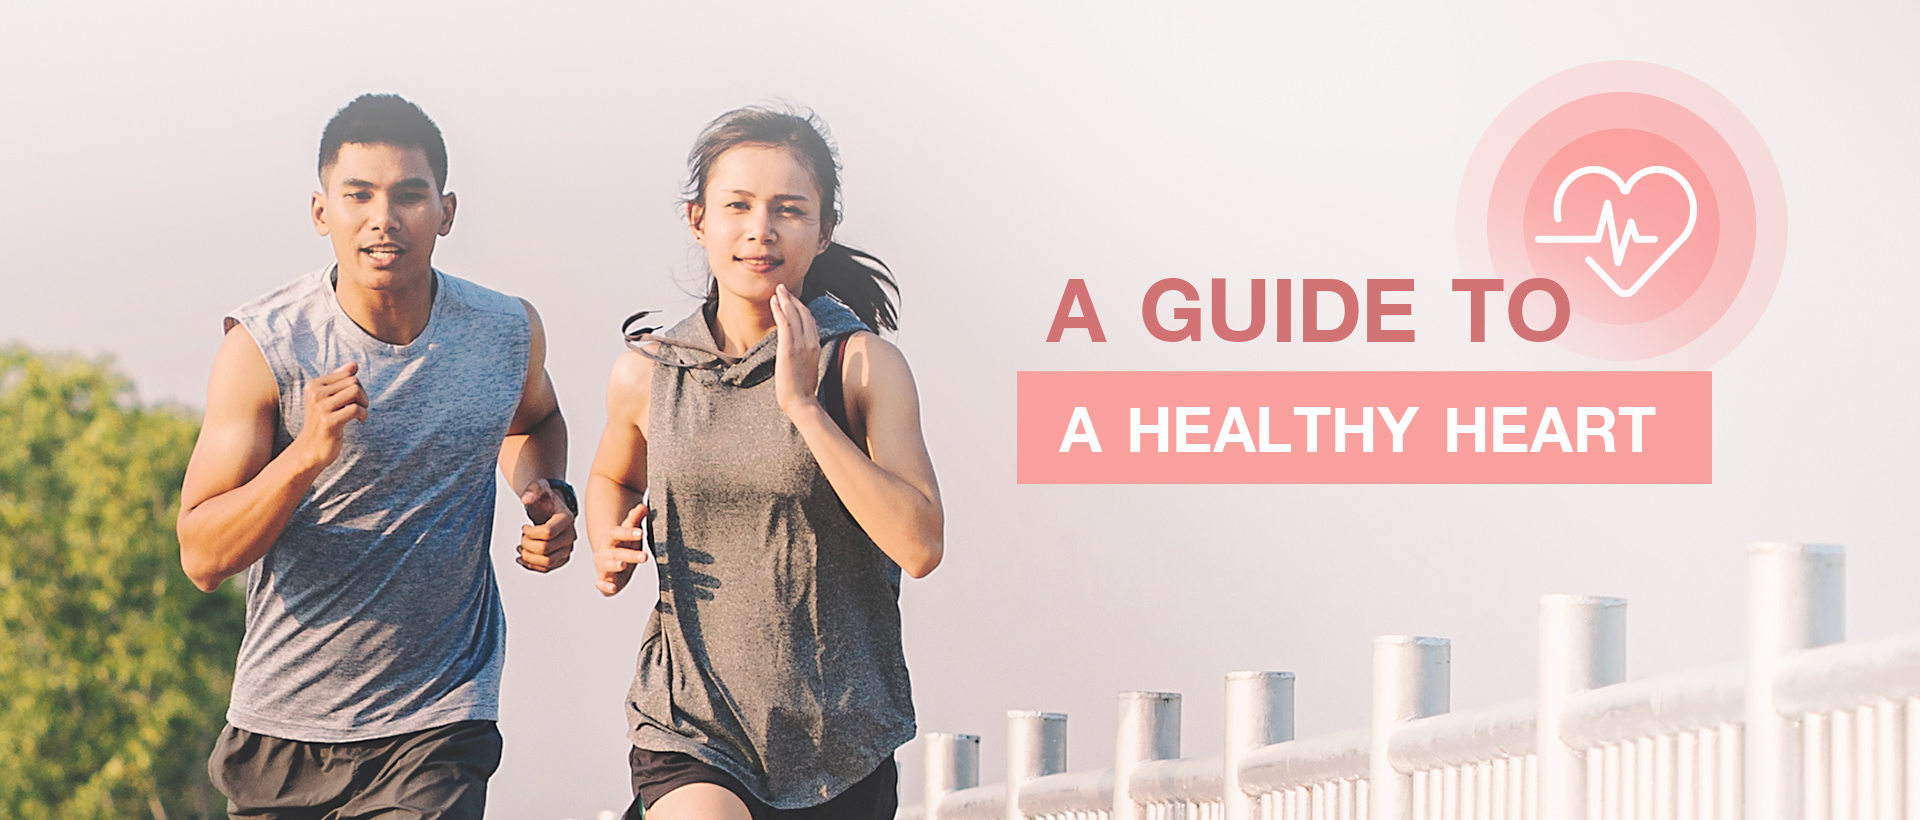 A guide to a healthy heart 